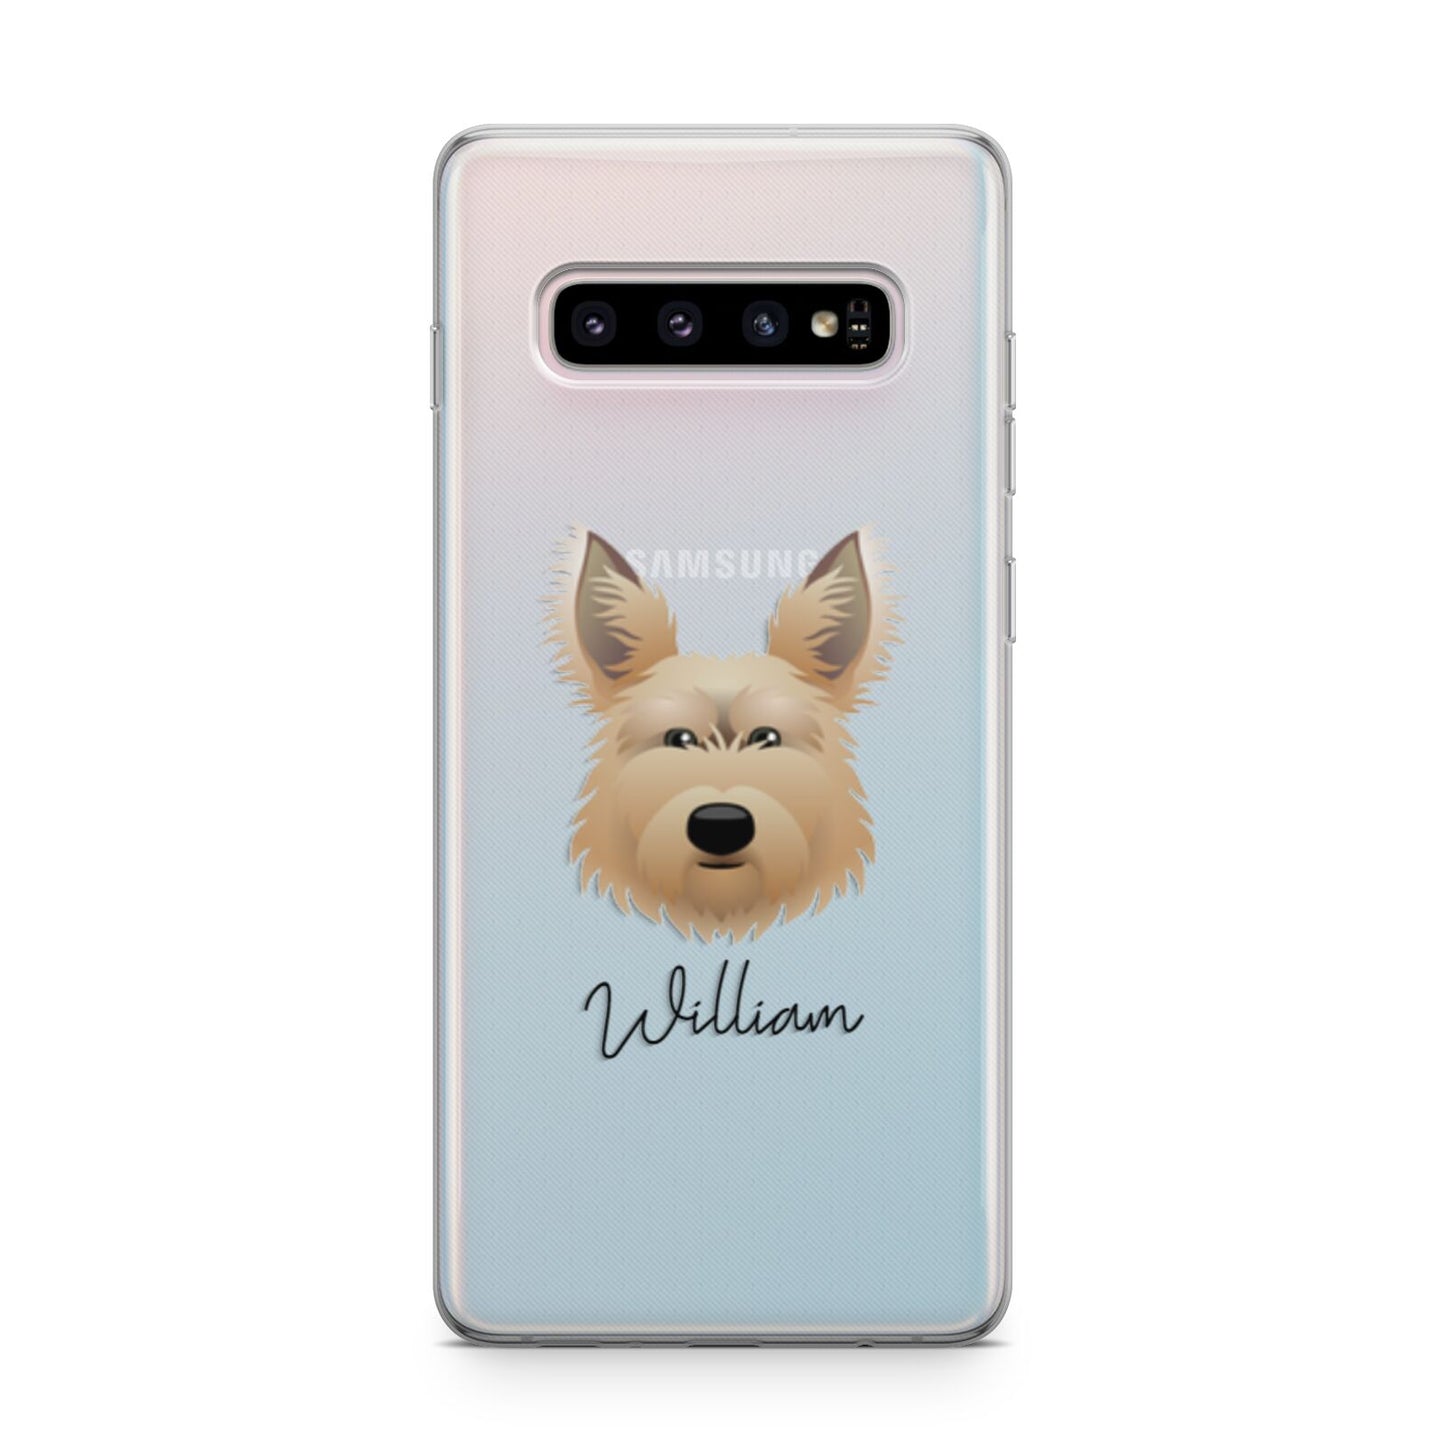 Picardy Sheepdog Personalised Samsung Galaxy S10 Plus Case